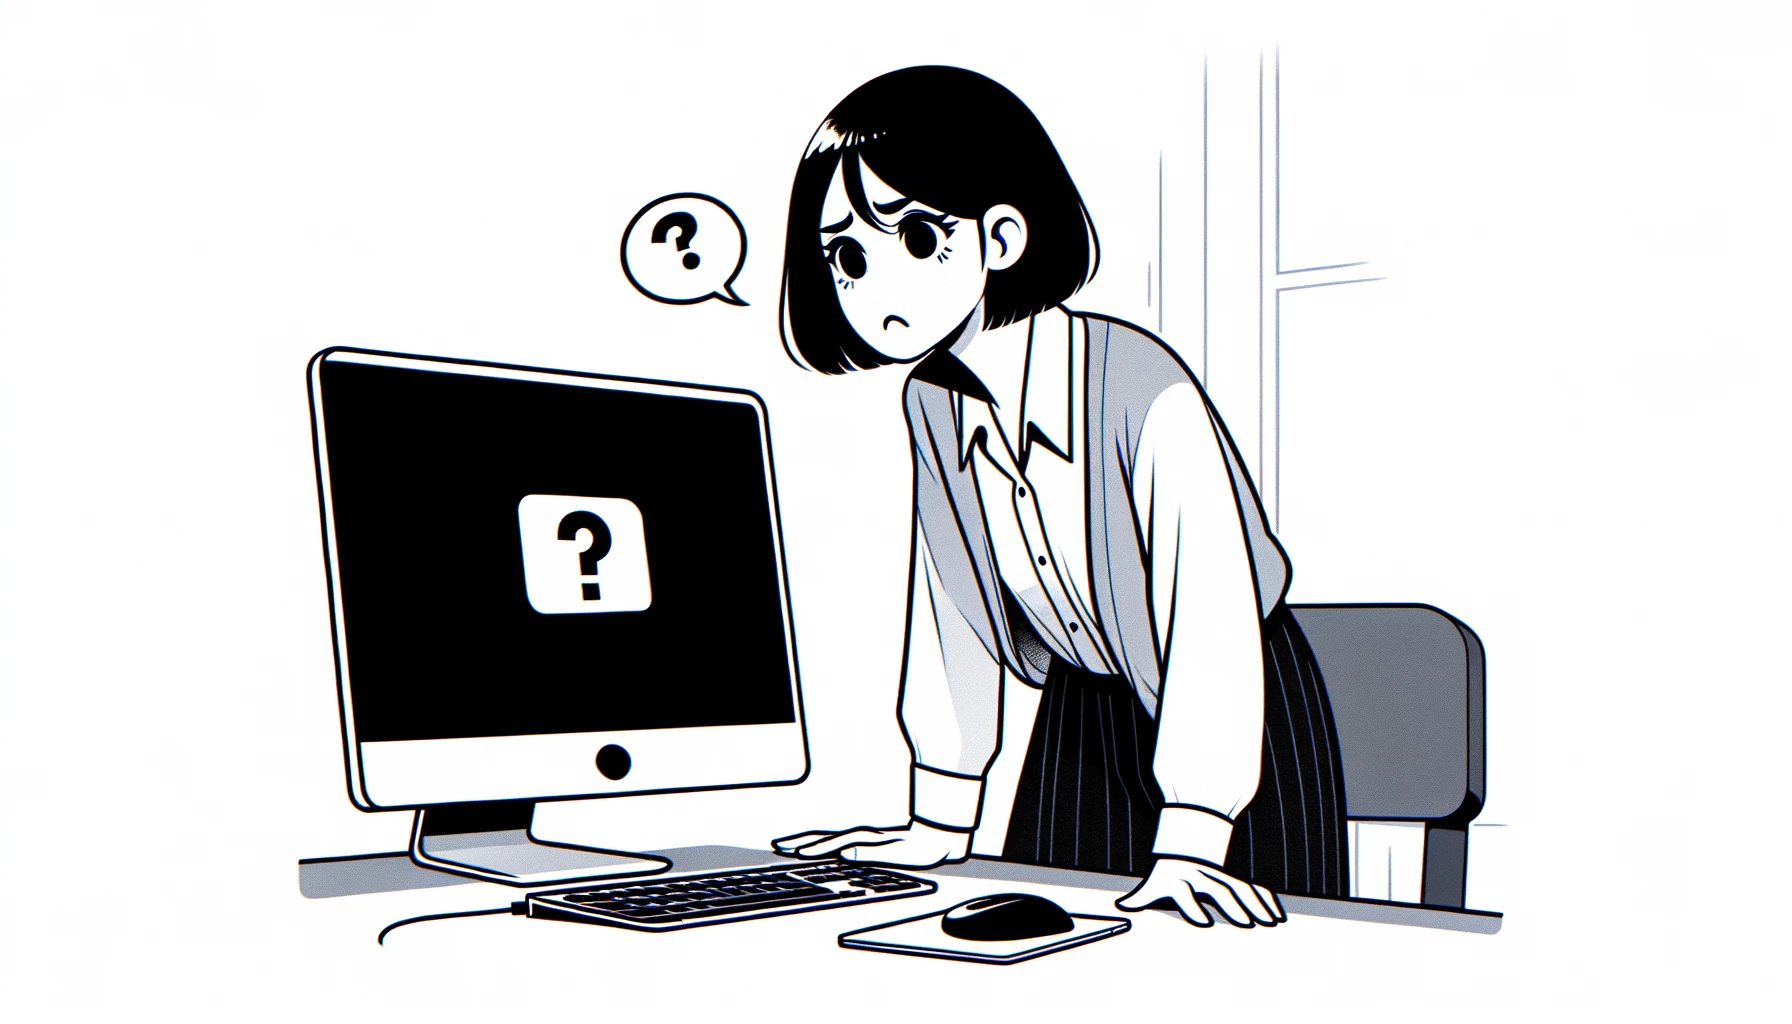 An illustration of a woman with short black hair looking frustrated and confused in front of a computer that won't start. The scene is set in a home office environment, showing the woman leaning towards the screen, trying to understand the problem. The computer screen is blank, indicating that the PC is not booting up. The style is simple and clean, with minimal background details to keep the focus on the woman and the computer. The illustration is wide.